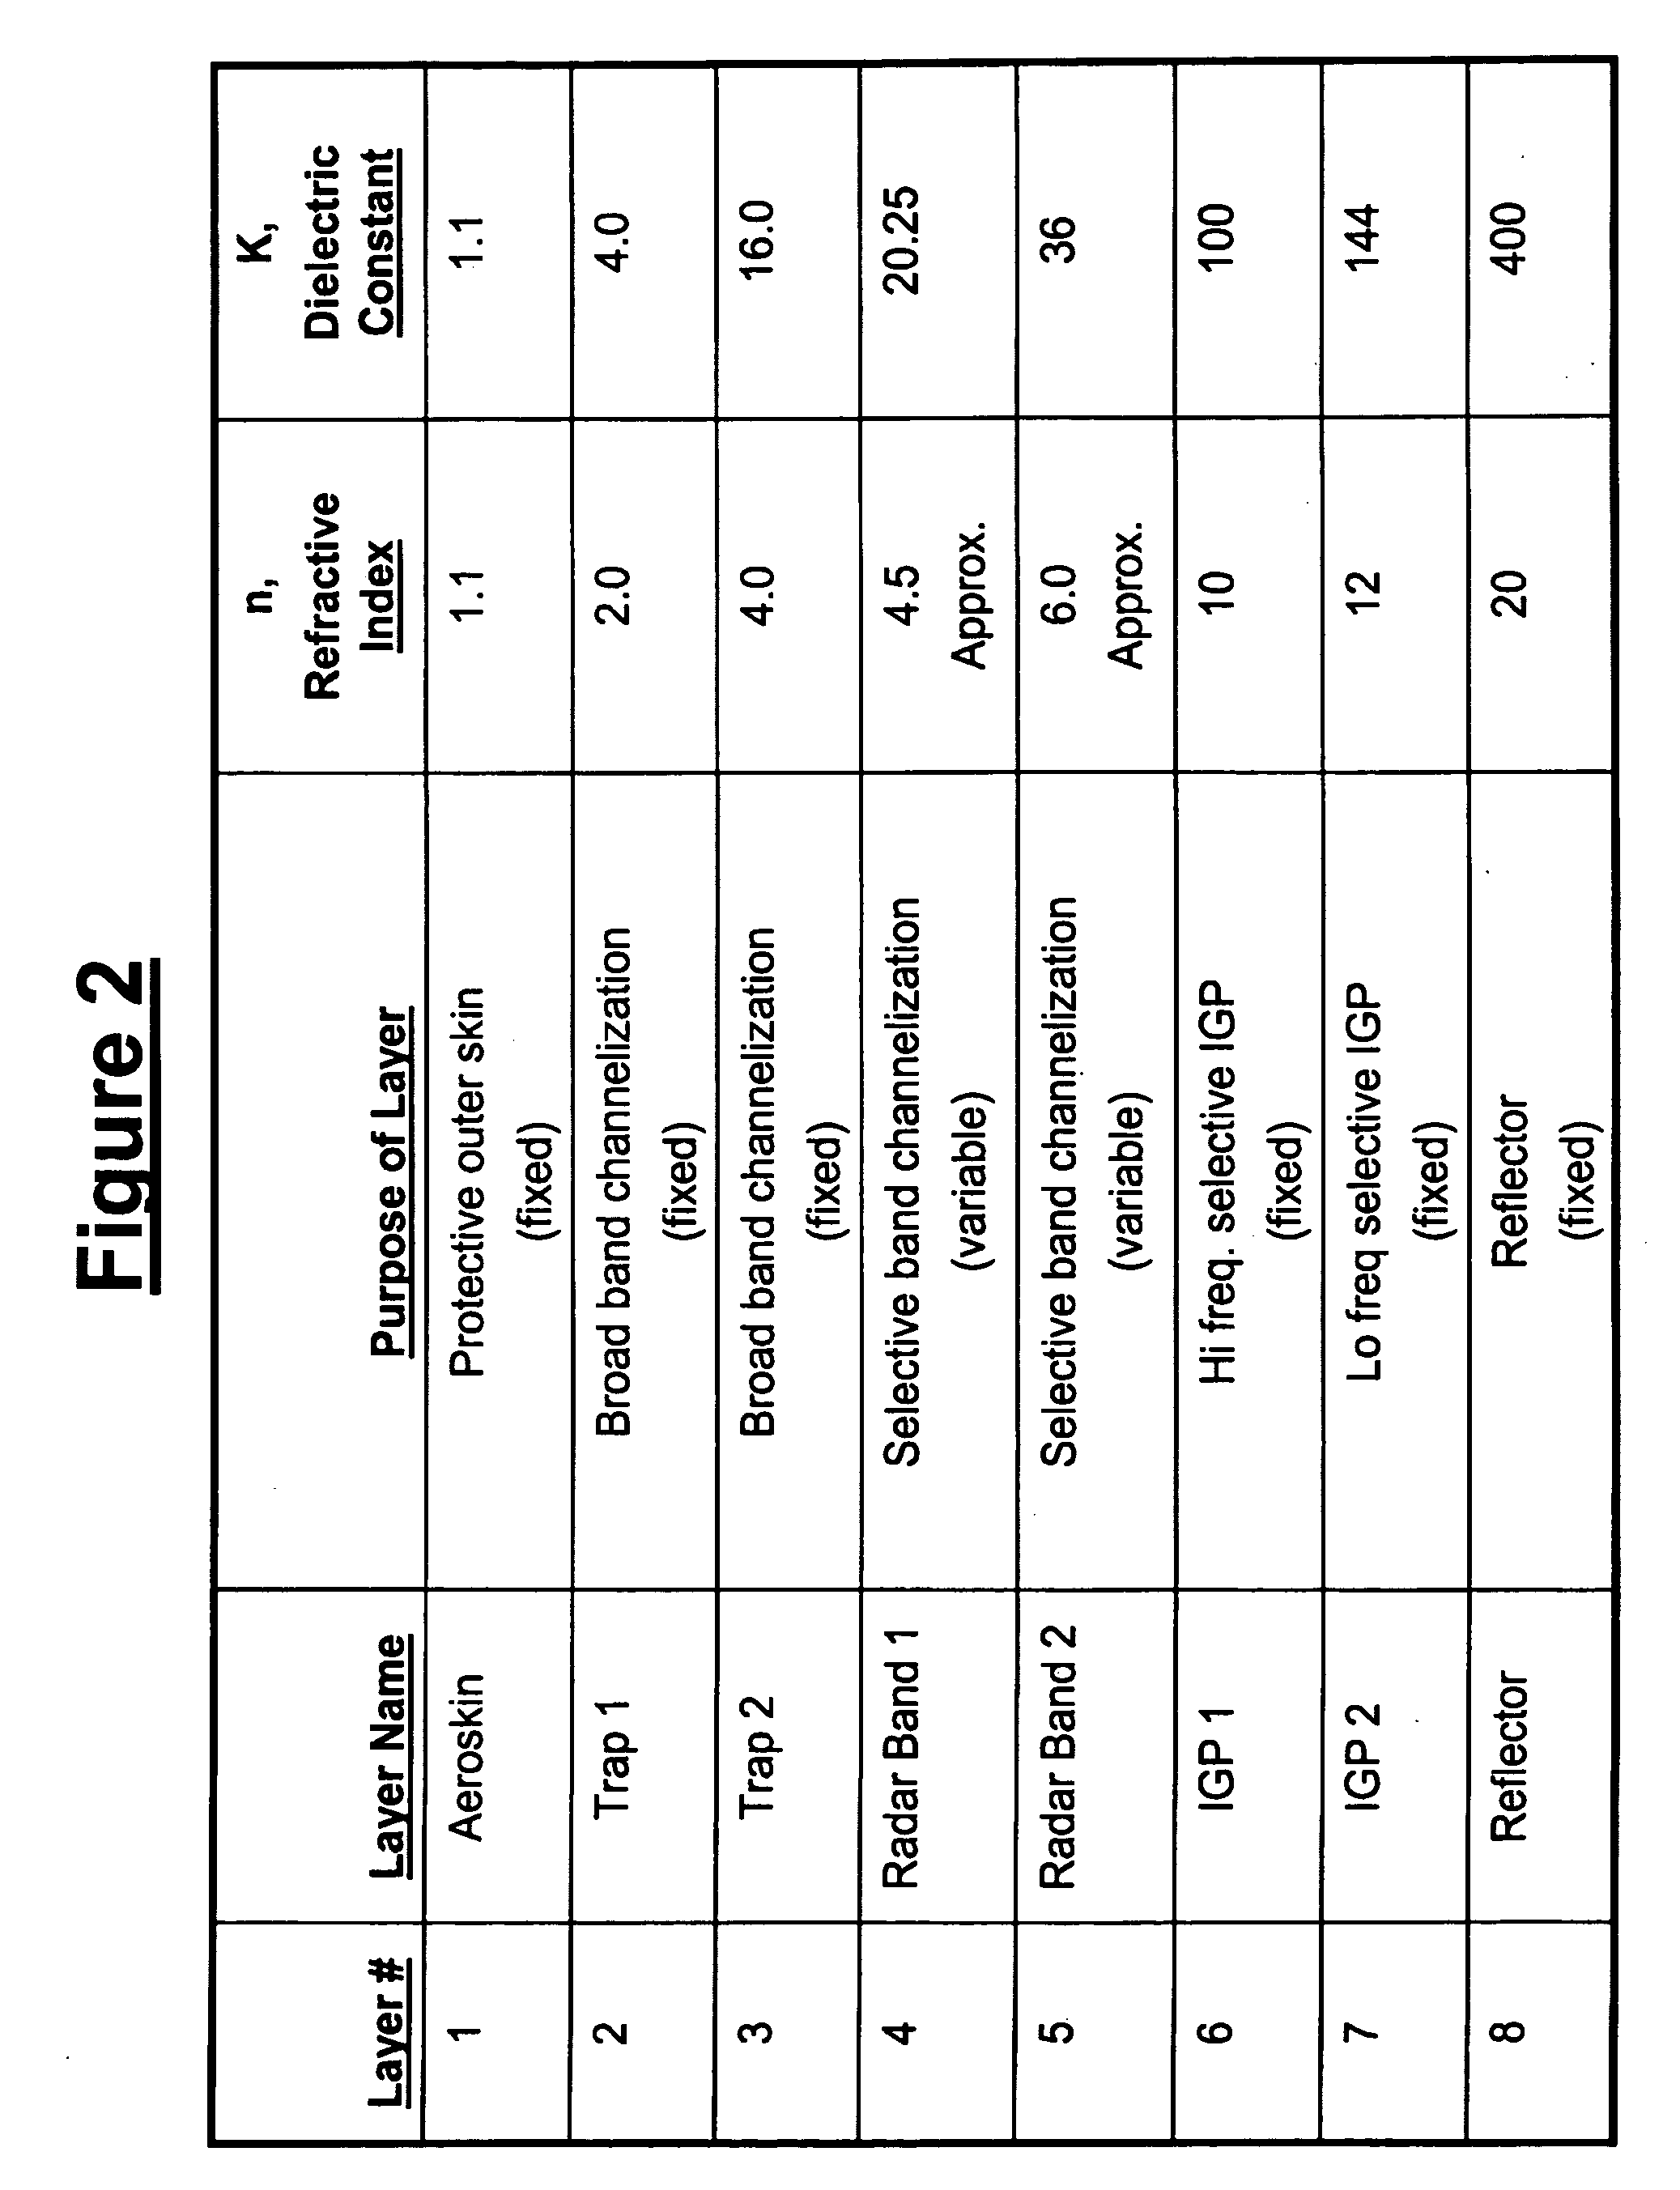 Method of agile reduction of radar cross section using electromagnetic channelization